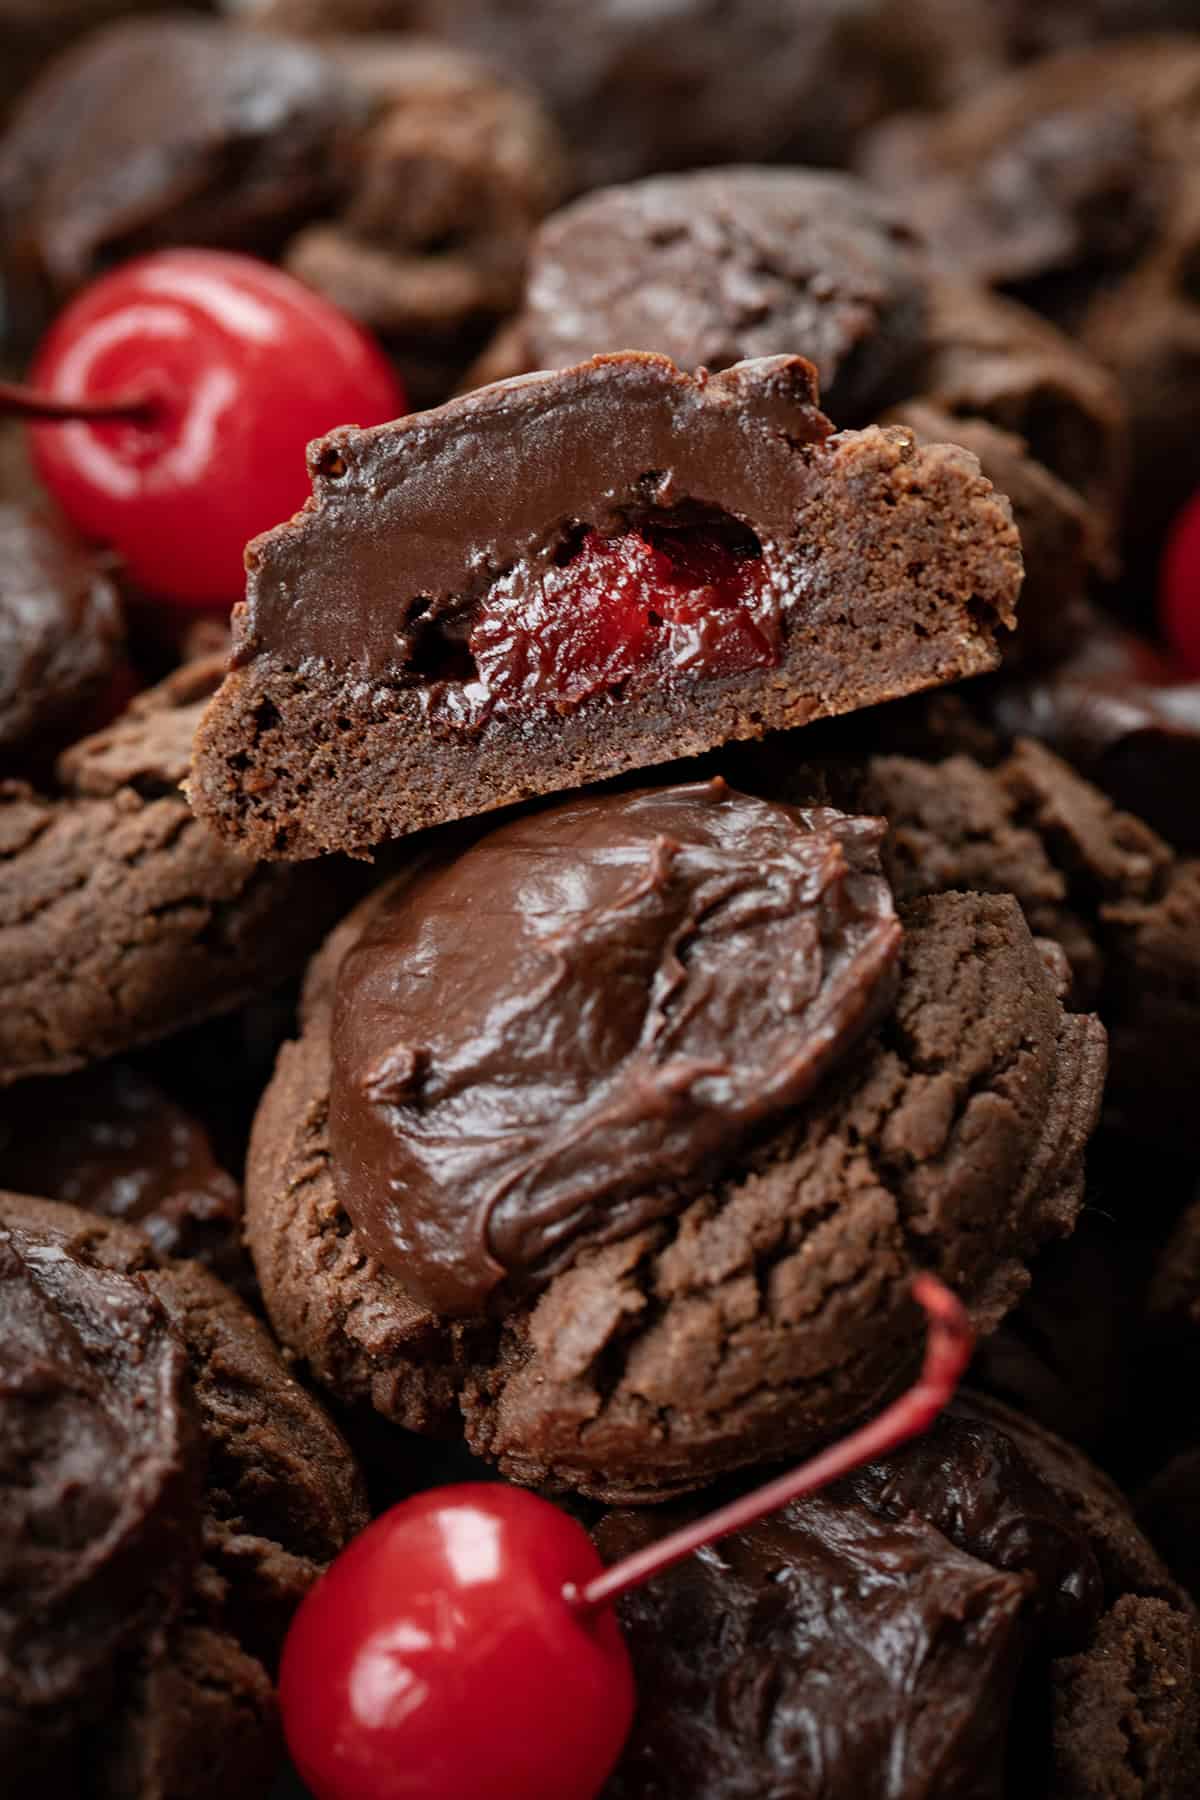 Chocolate Covered Cherry Cookies piled together and one cut in half.